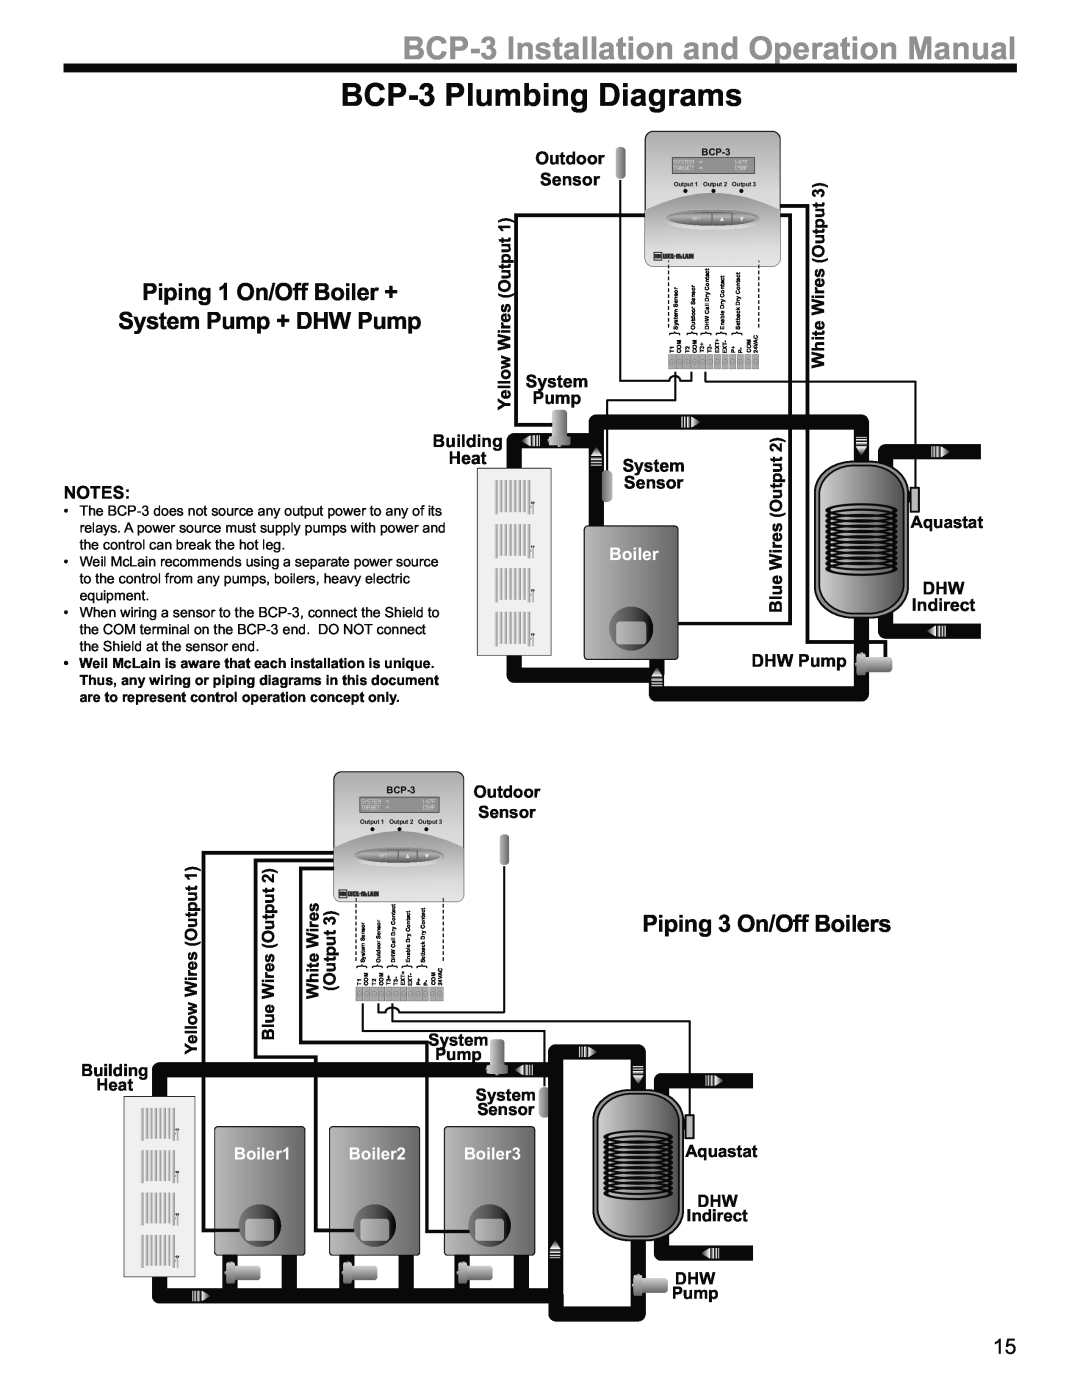 Weil-McLain BCP-3Plumbing Diagrams, Piping 1 On/Off Boiler +, System Pump + DHW Pump, Piping 3 On/Off Boilers, Boiler1 